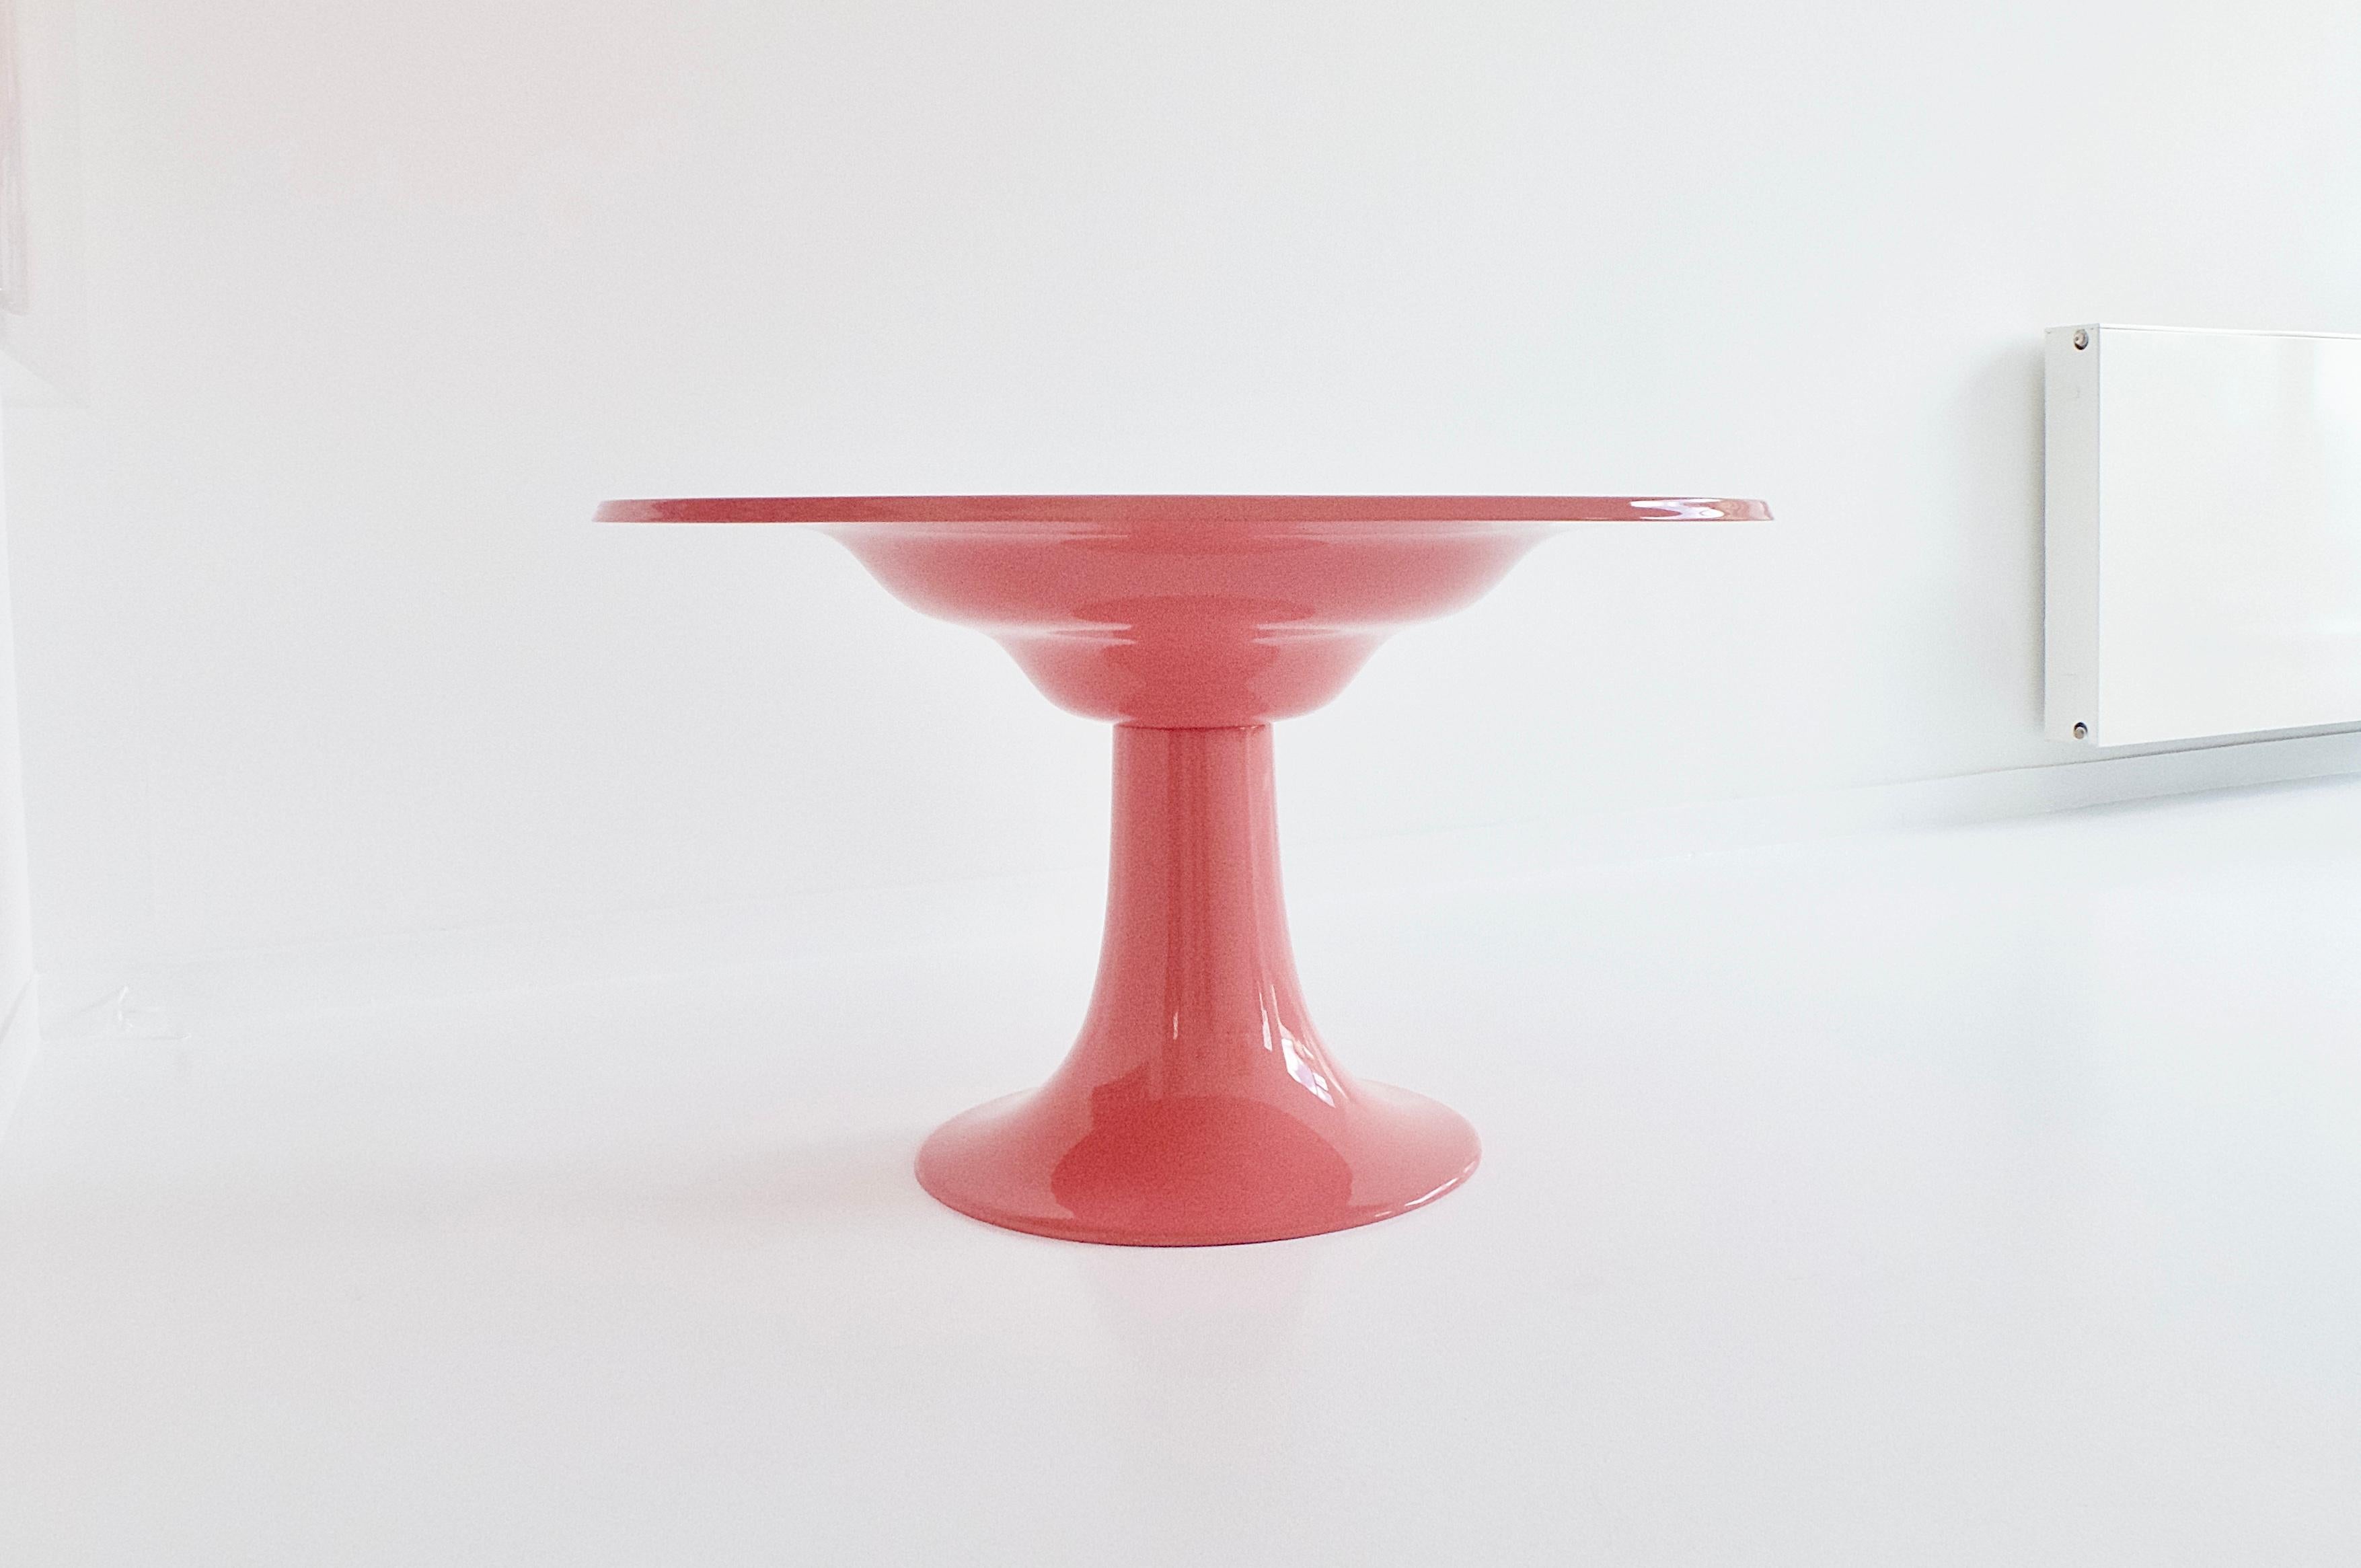 This is a famous zapf‚ säulentisch ‘(column table), an early version with slanted edge (probably 1967, later the tables were manufactured with round edges). We customized the table and gave it a new life with a never produced color: dusky pink. Less